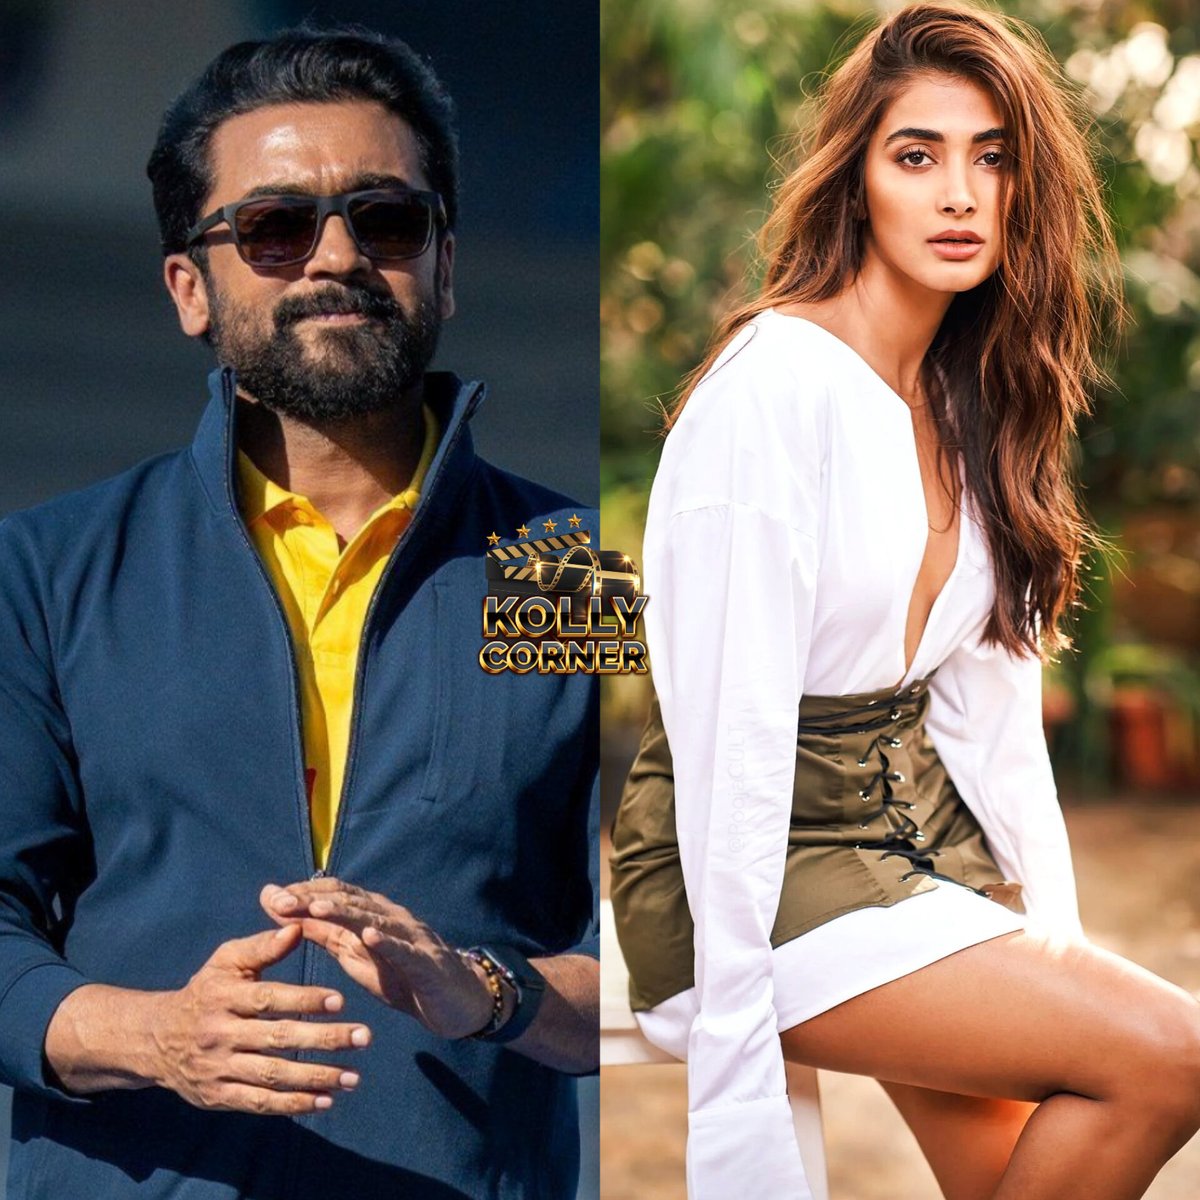 #Suriya44 Exclusive Buzz 💫 #PoojaHegde likely to play female lead in #Suriya's next directed by KarthikSubburaj. Shooting starting from next month 💥